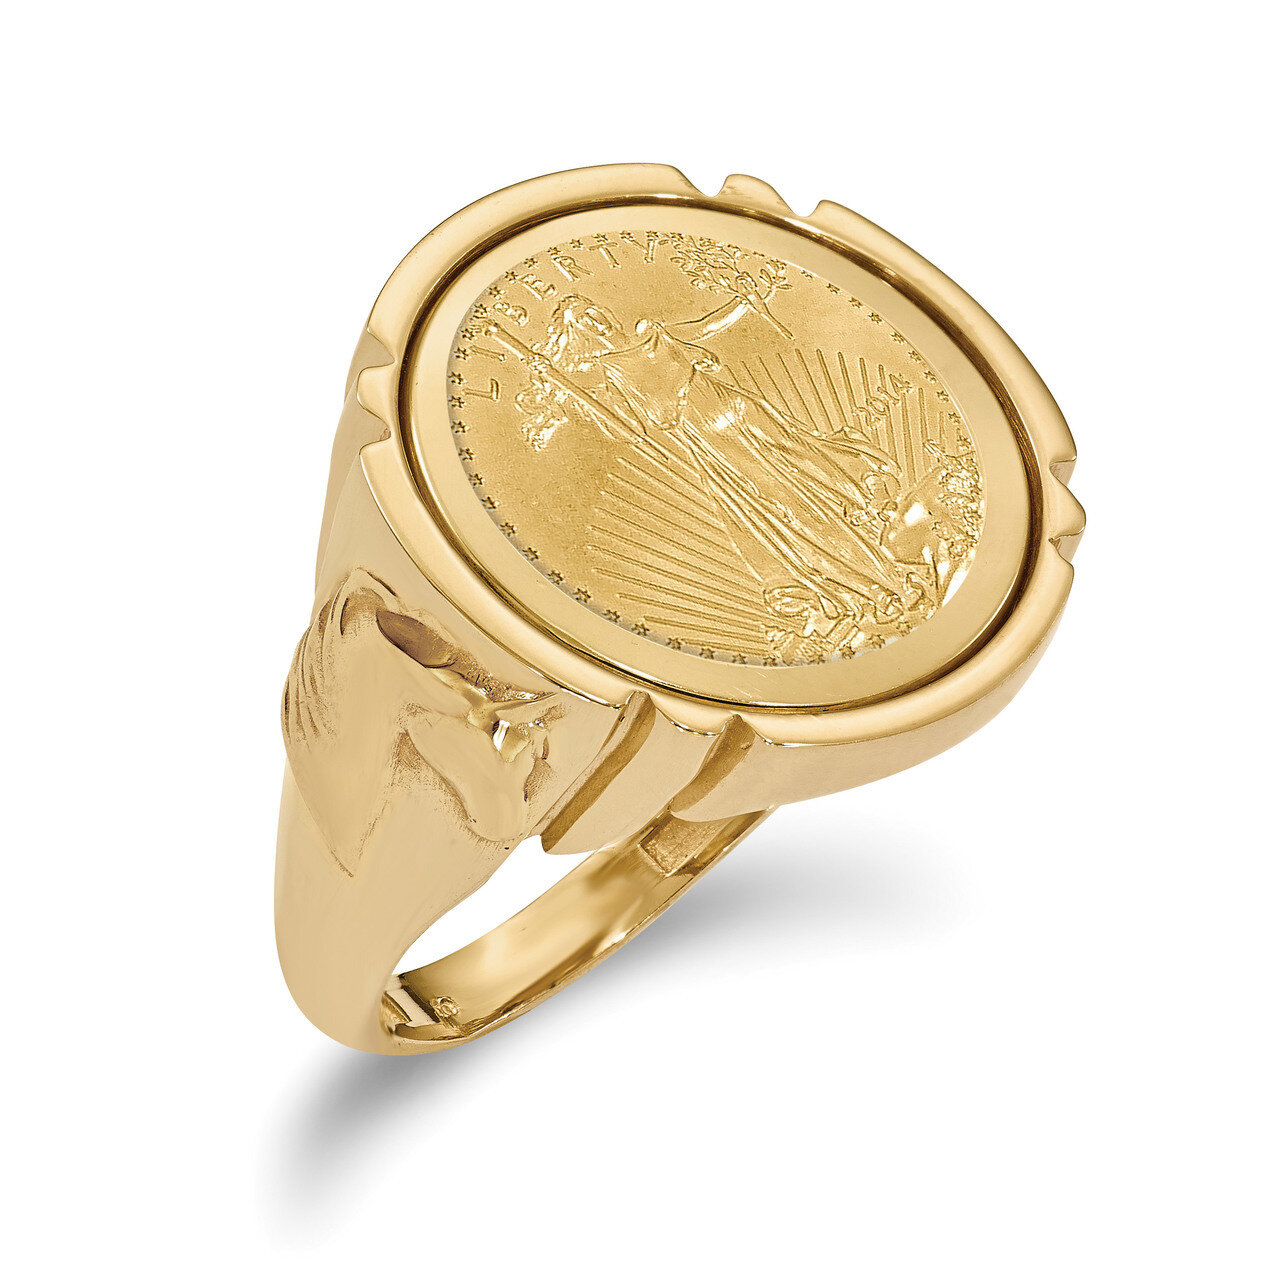 1/10AE Polished Coin Ring with coin 14k Gold CR5/10AEC